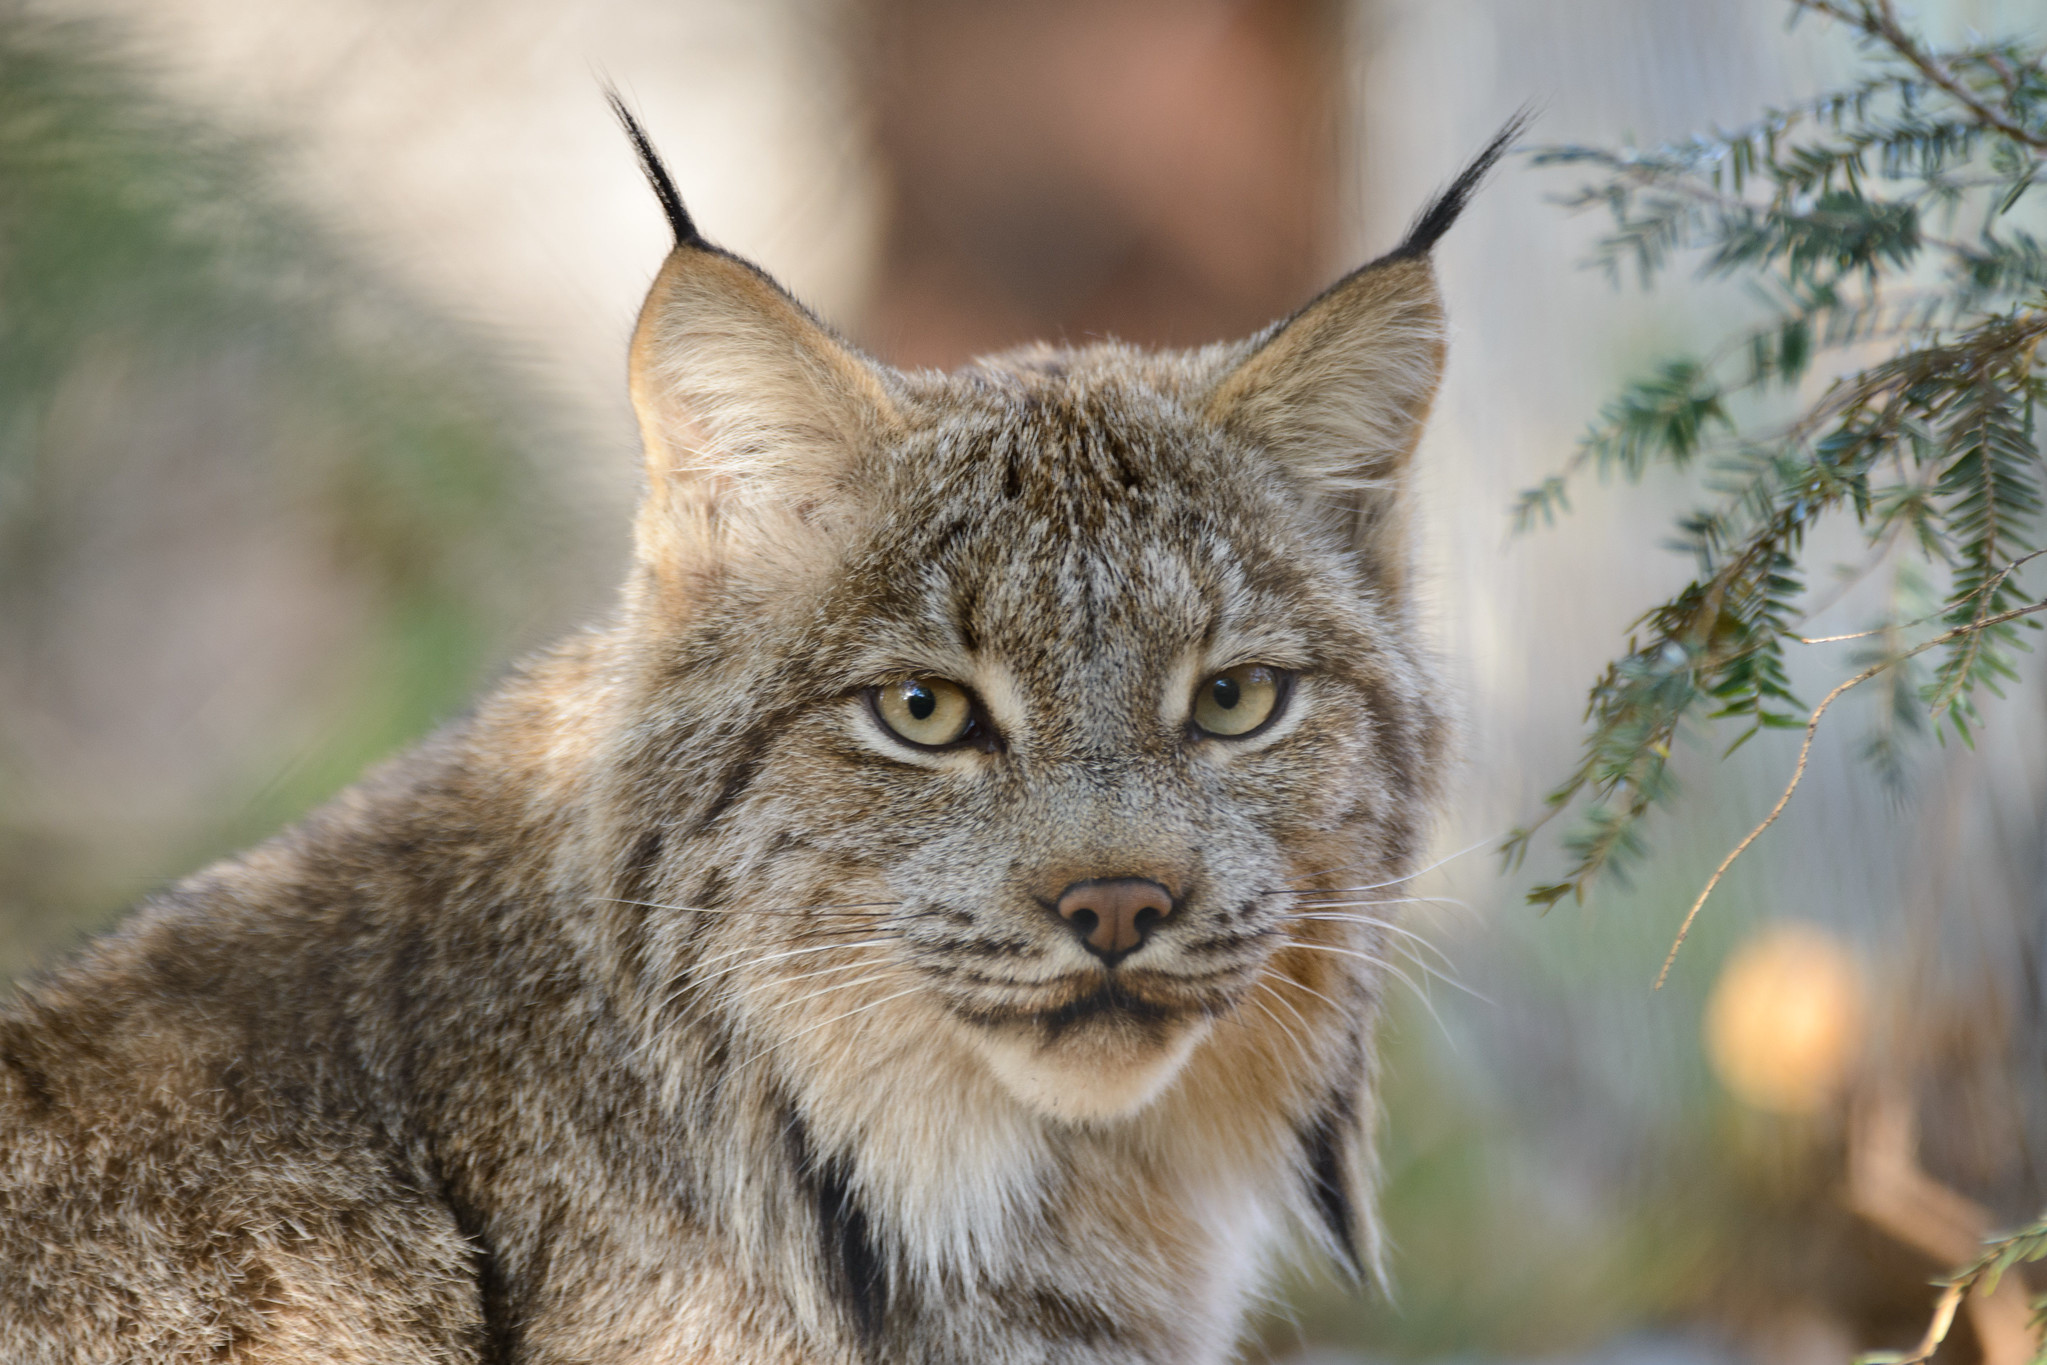 Confirmation of COVID-19 in a Canada Lynx at a Pennsylvania Zoo